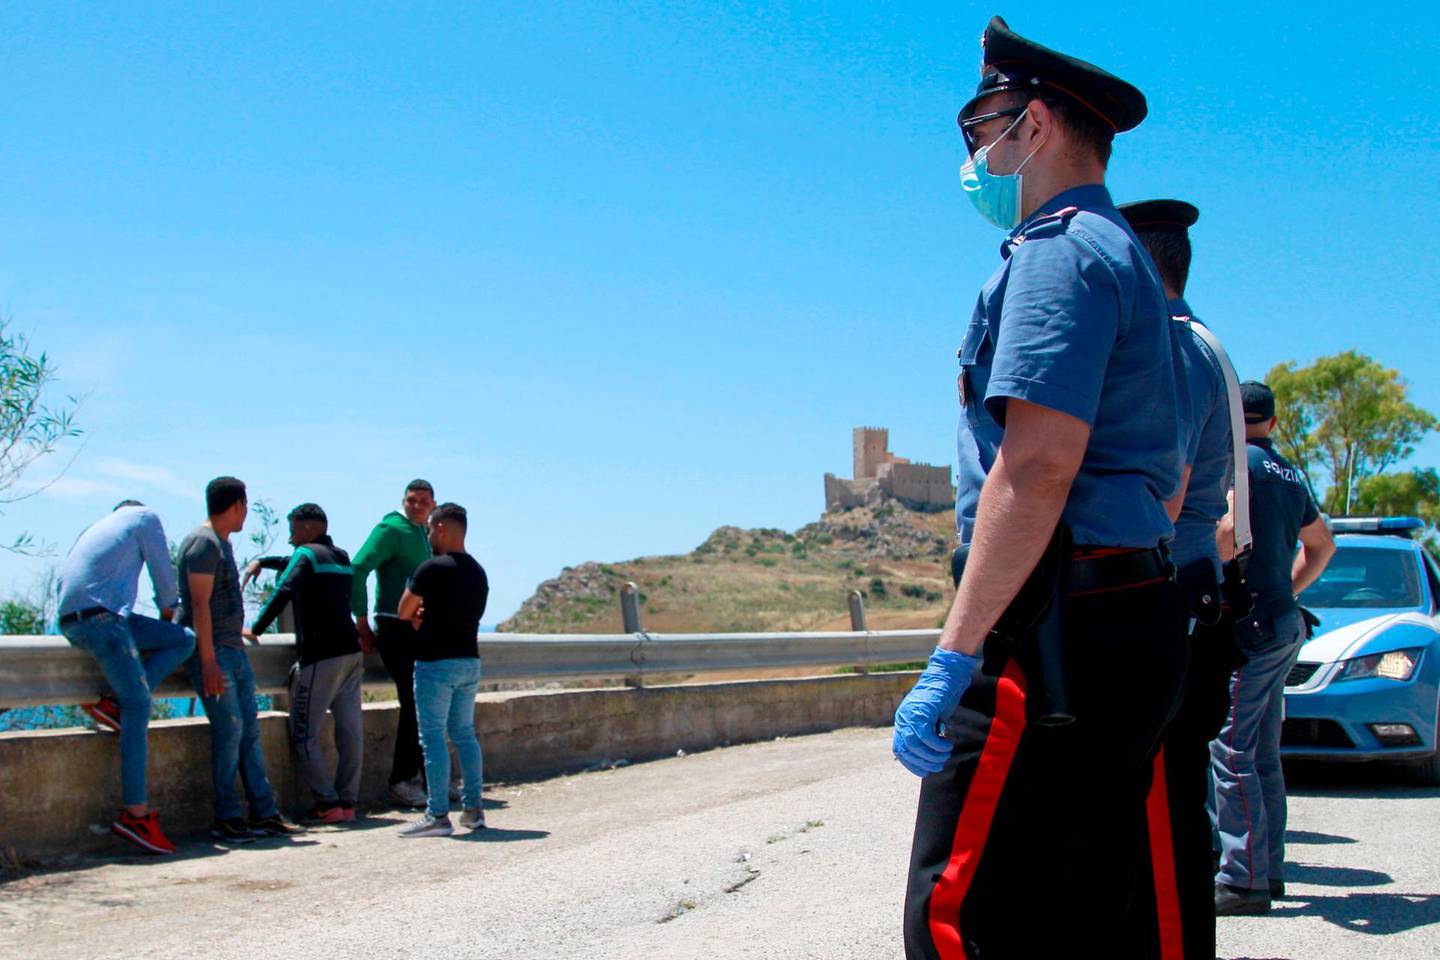 Italian police detain and check immigrants found along the road and in the countryside in Palma di Montechiaro near Agrigento Sicily on May 24, 2020.  About 400 migrants were landed on May 24, 2020, on a beach in Sicily from a boat which slipped away, this is the largest migrant arrival in Sicily for several years but smaller groups, mostly from Libya, are frequent arrivals. / AFP / Sandro CATANESE
